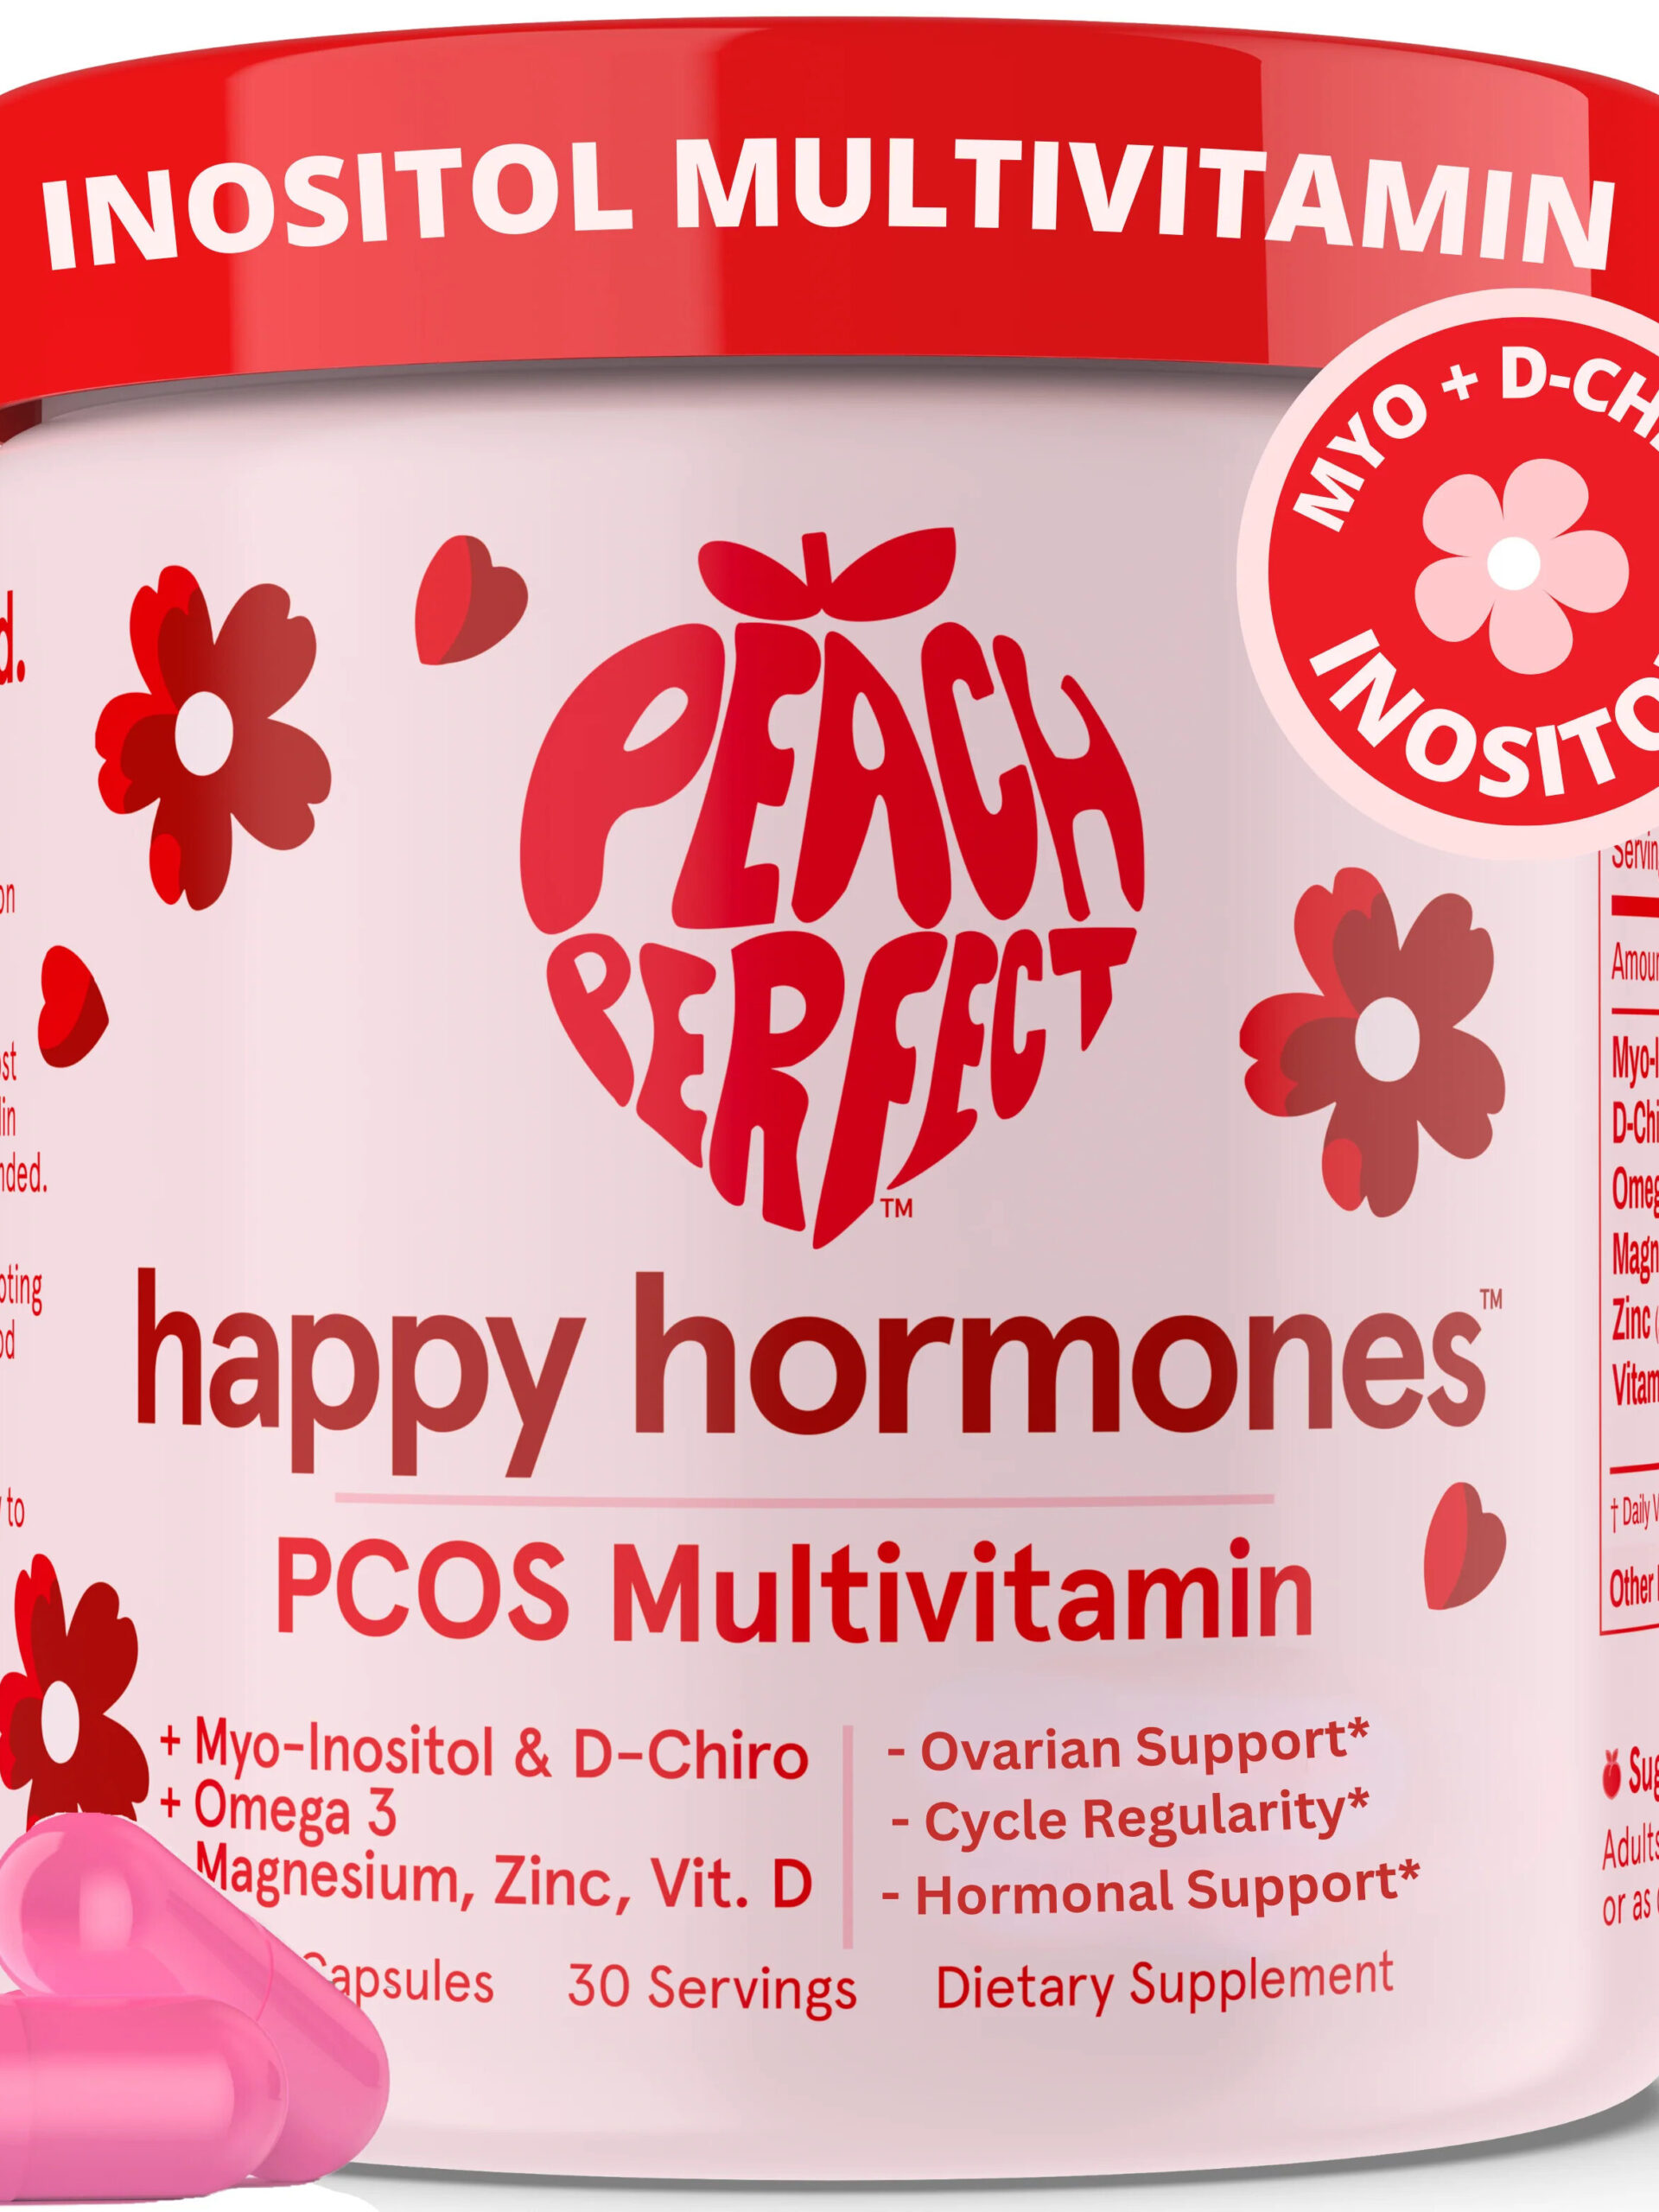 A container of "peach perfect happy hormones" multivitamin supplement with floral designs, emphasizing support for ovarian and hormonal health.